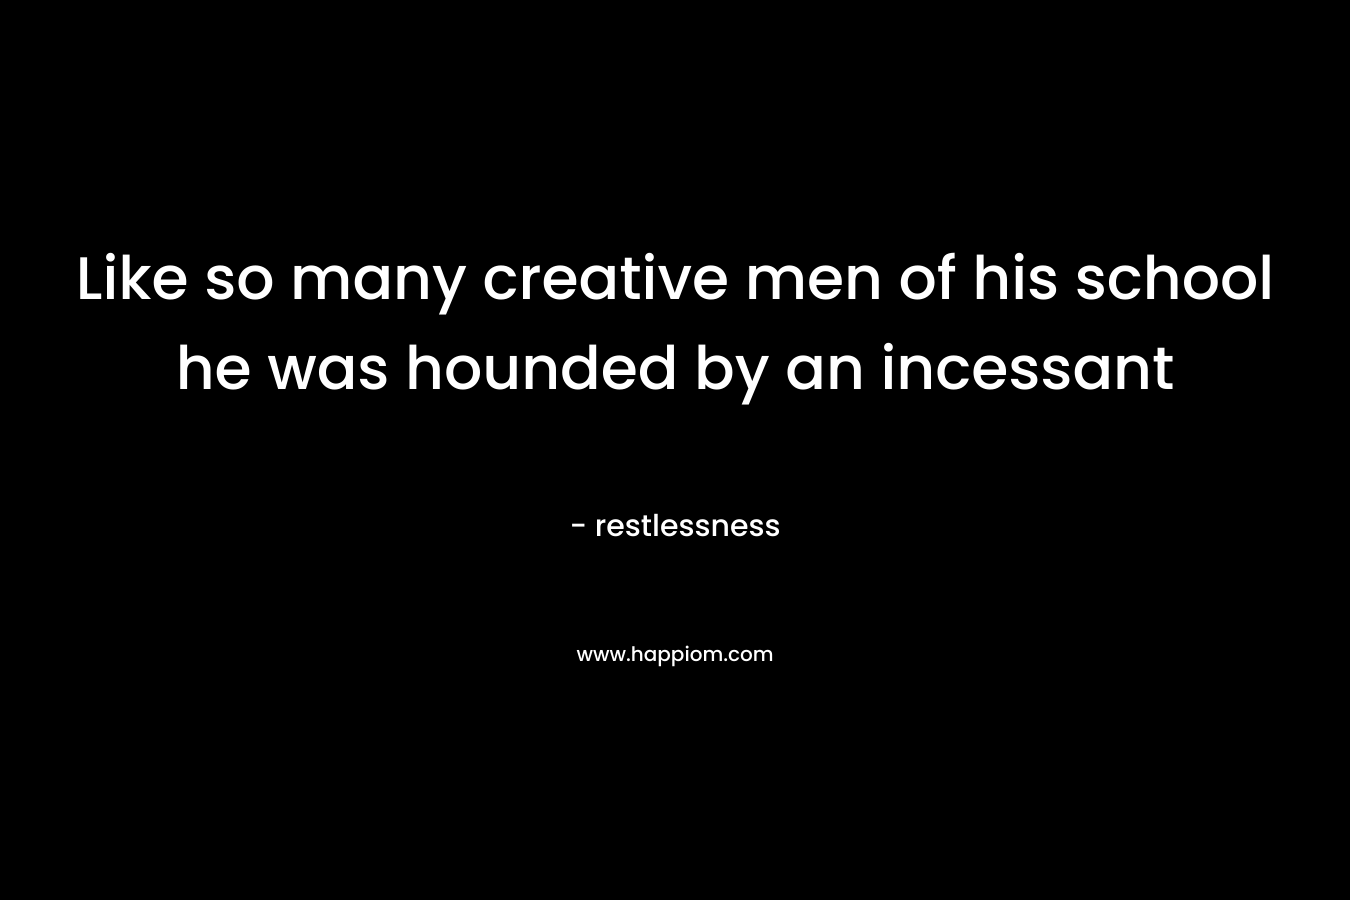 Like so many creative men of his school he was hounded by an incessant